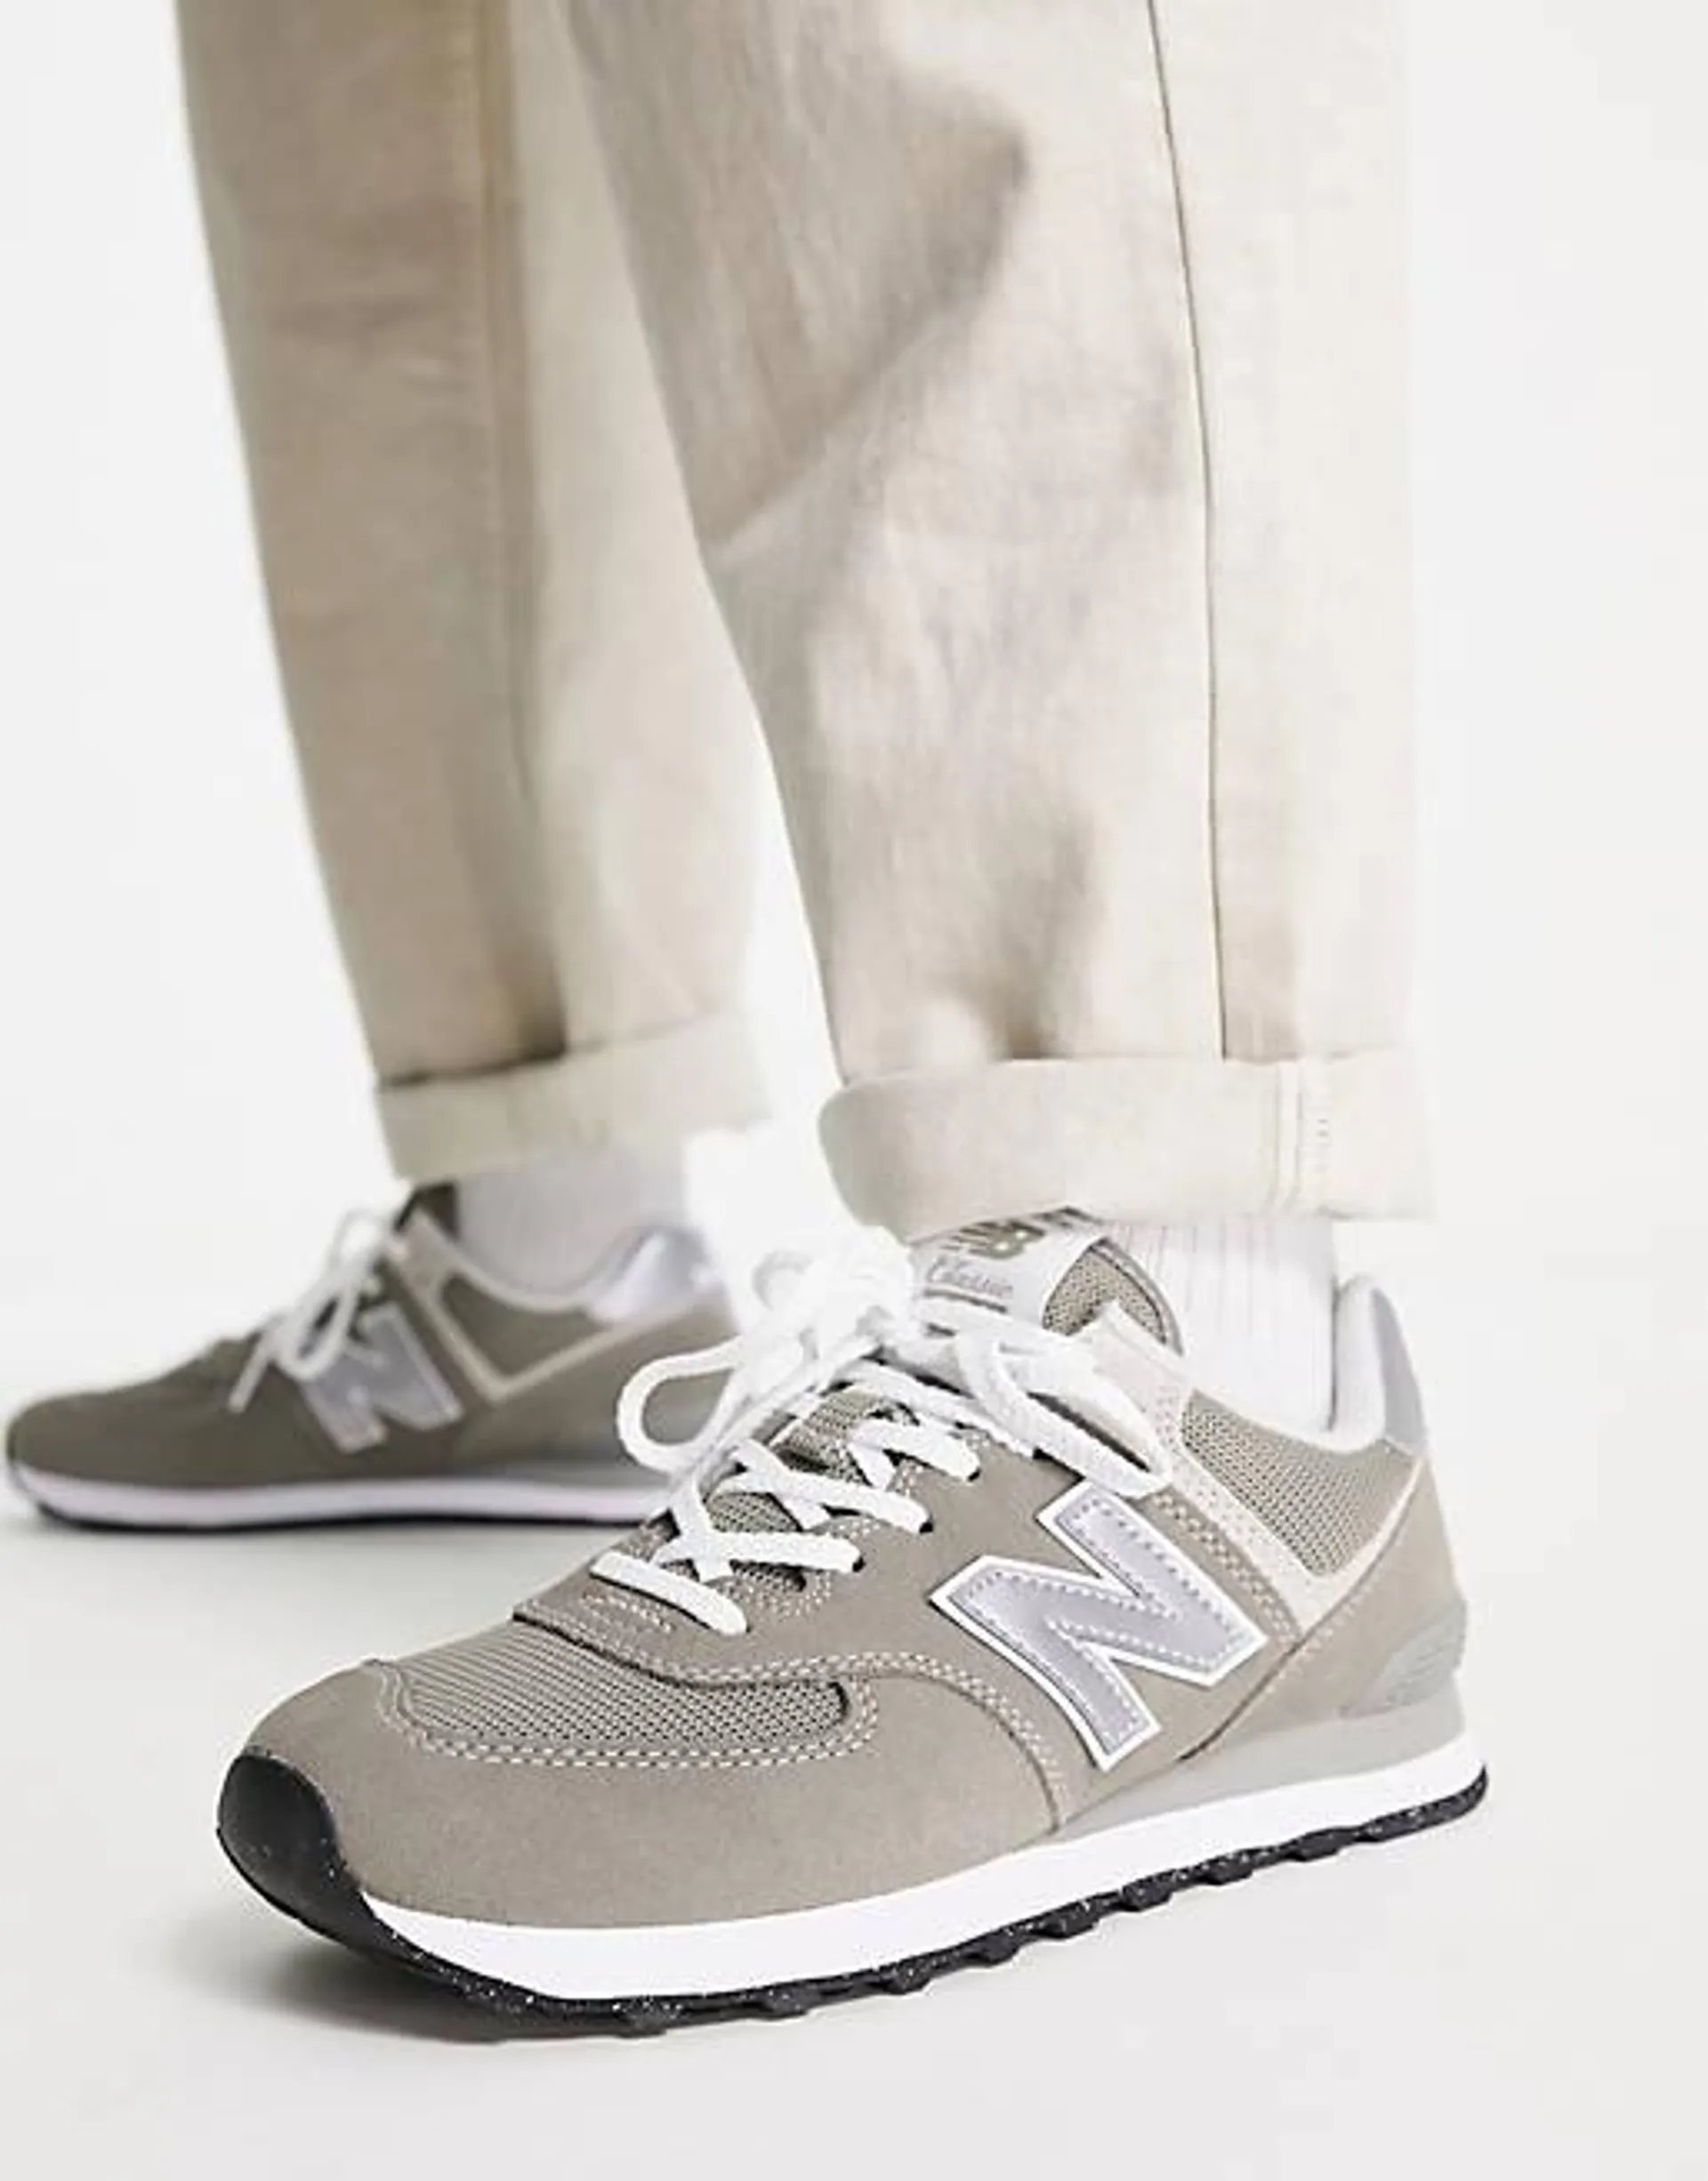 New Balance 574 sneakers in grey and white